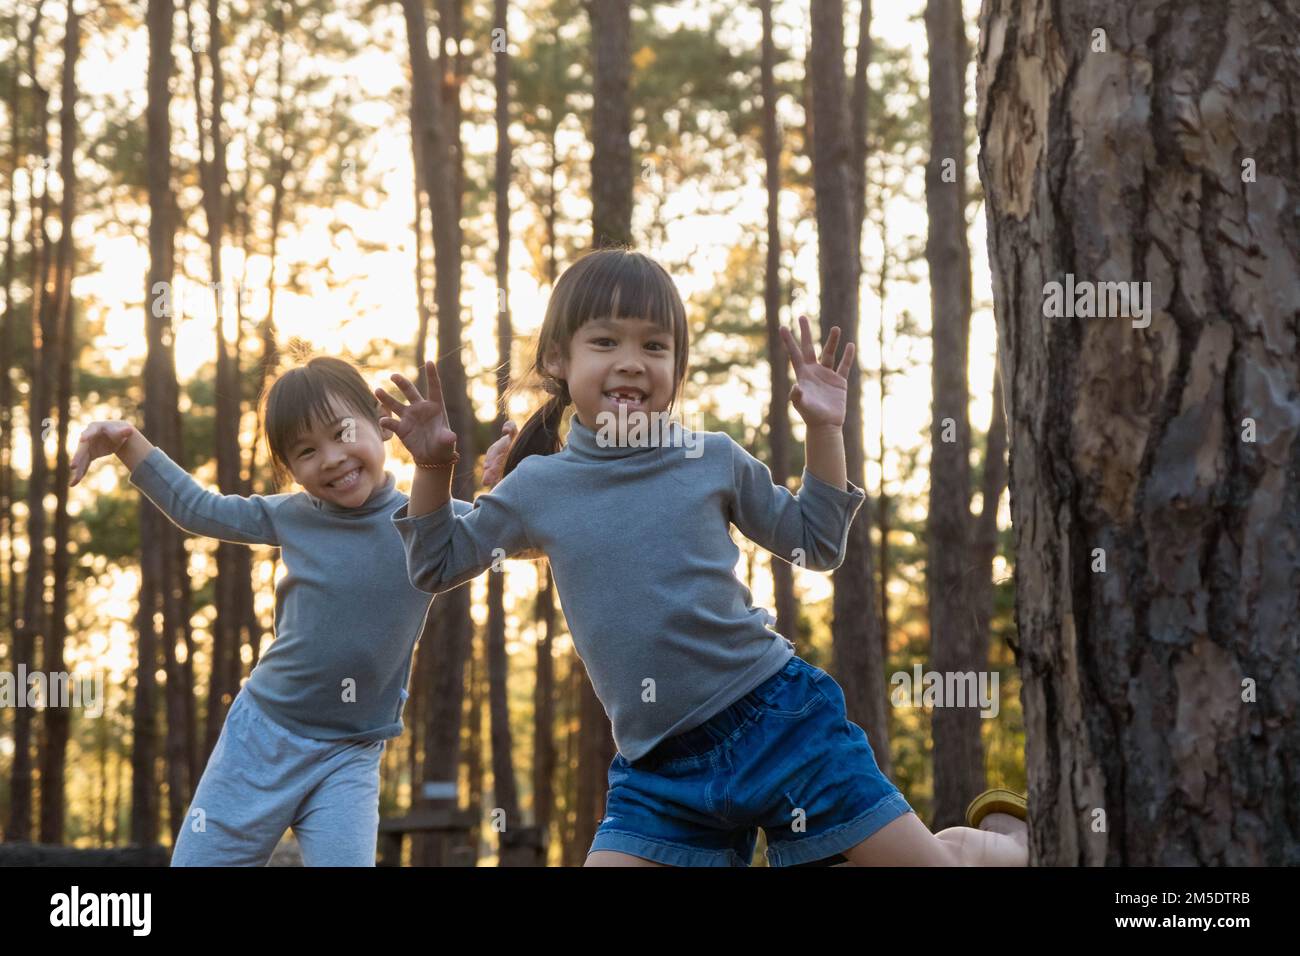 Funny little sisters peeking out from behind tree in winter park. Cute smiling child playing hide and seek in the forest. Children look into the camer Stock Photo